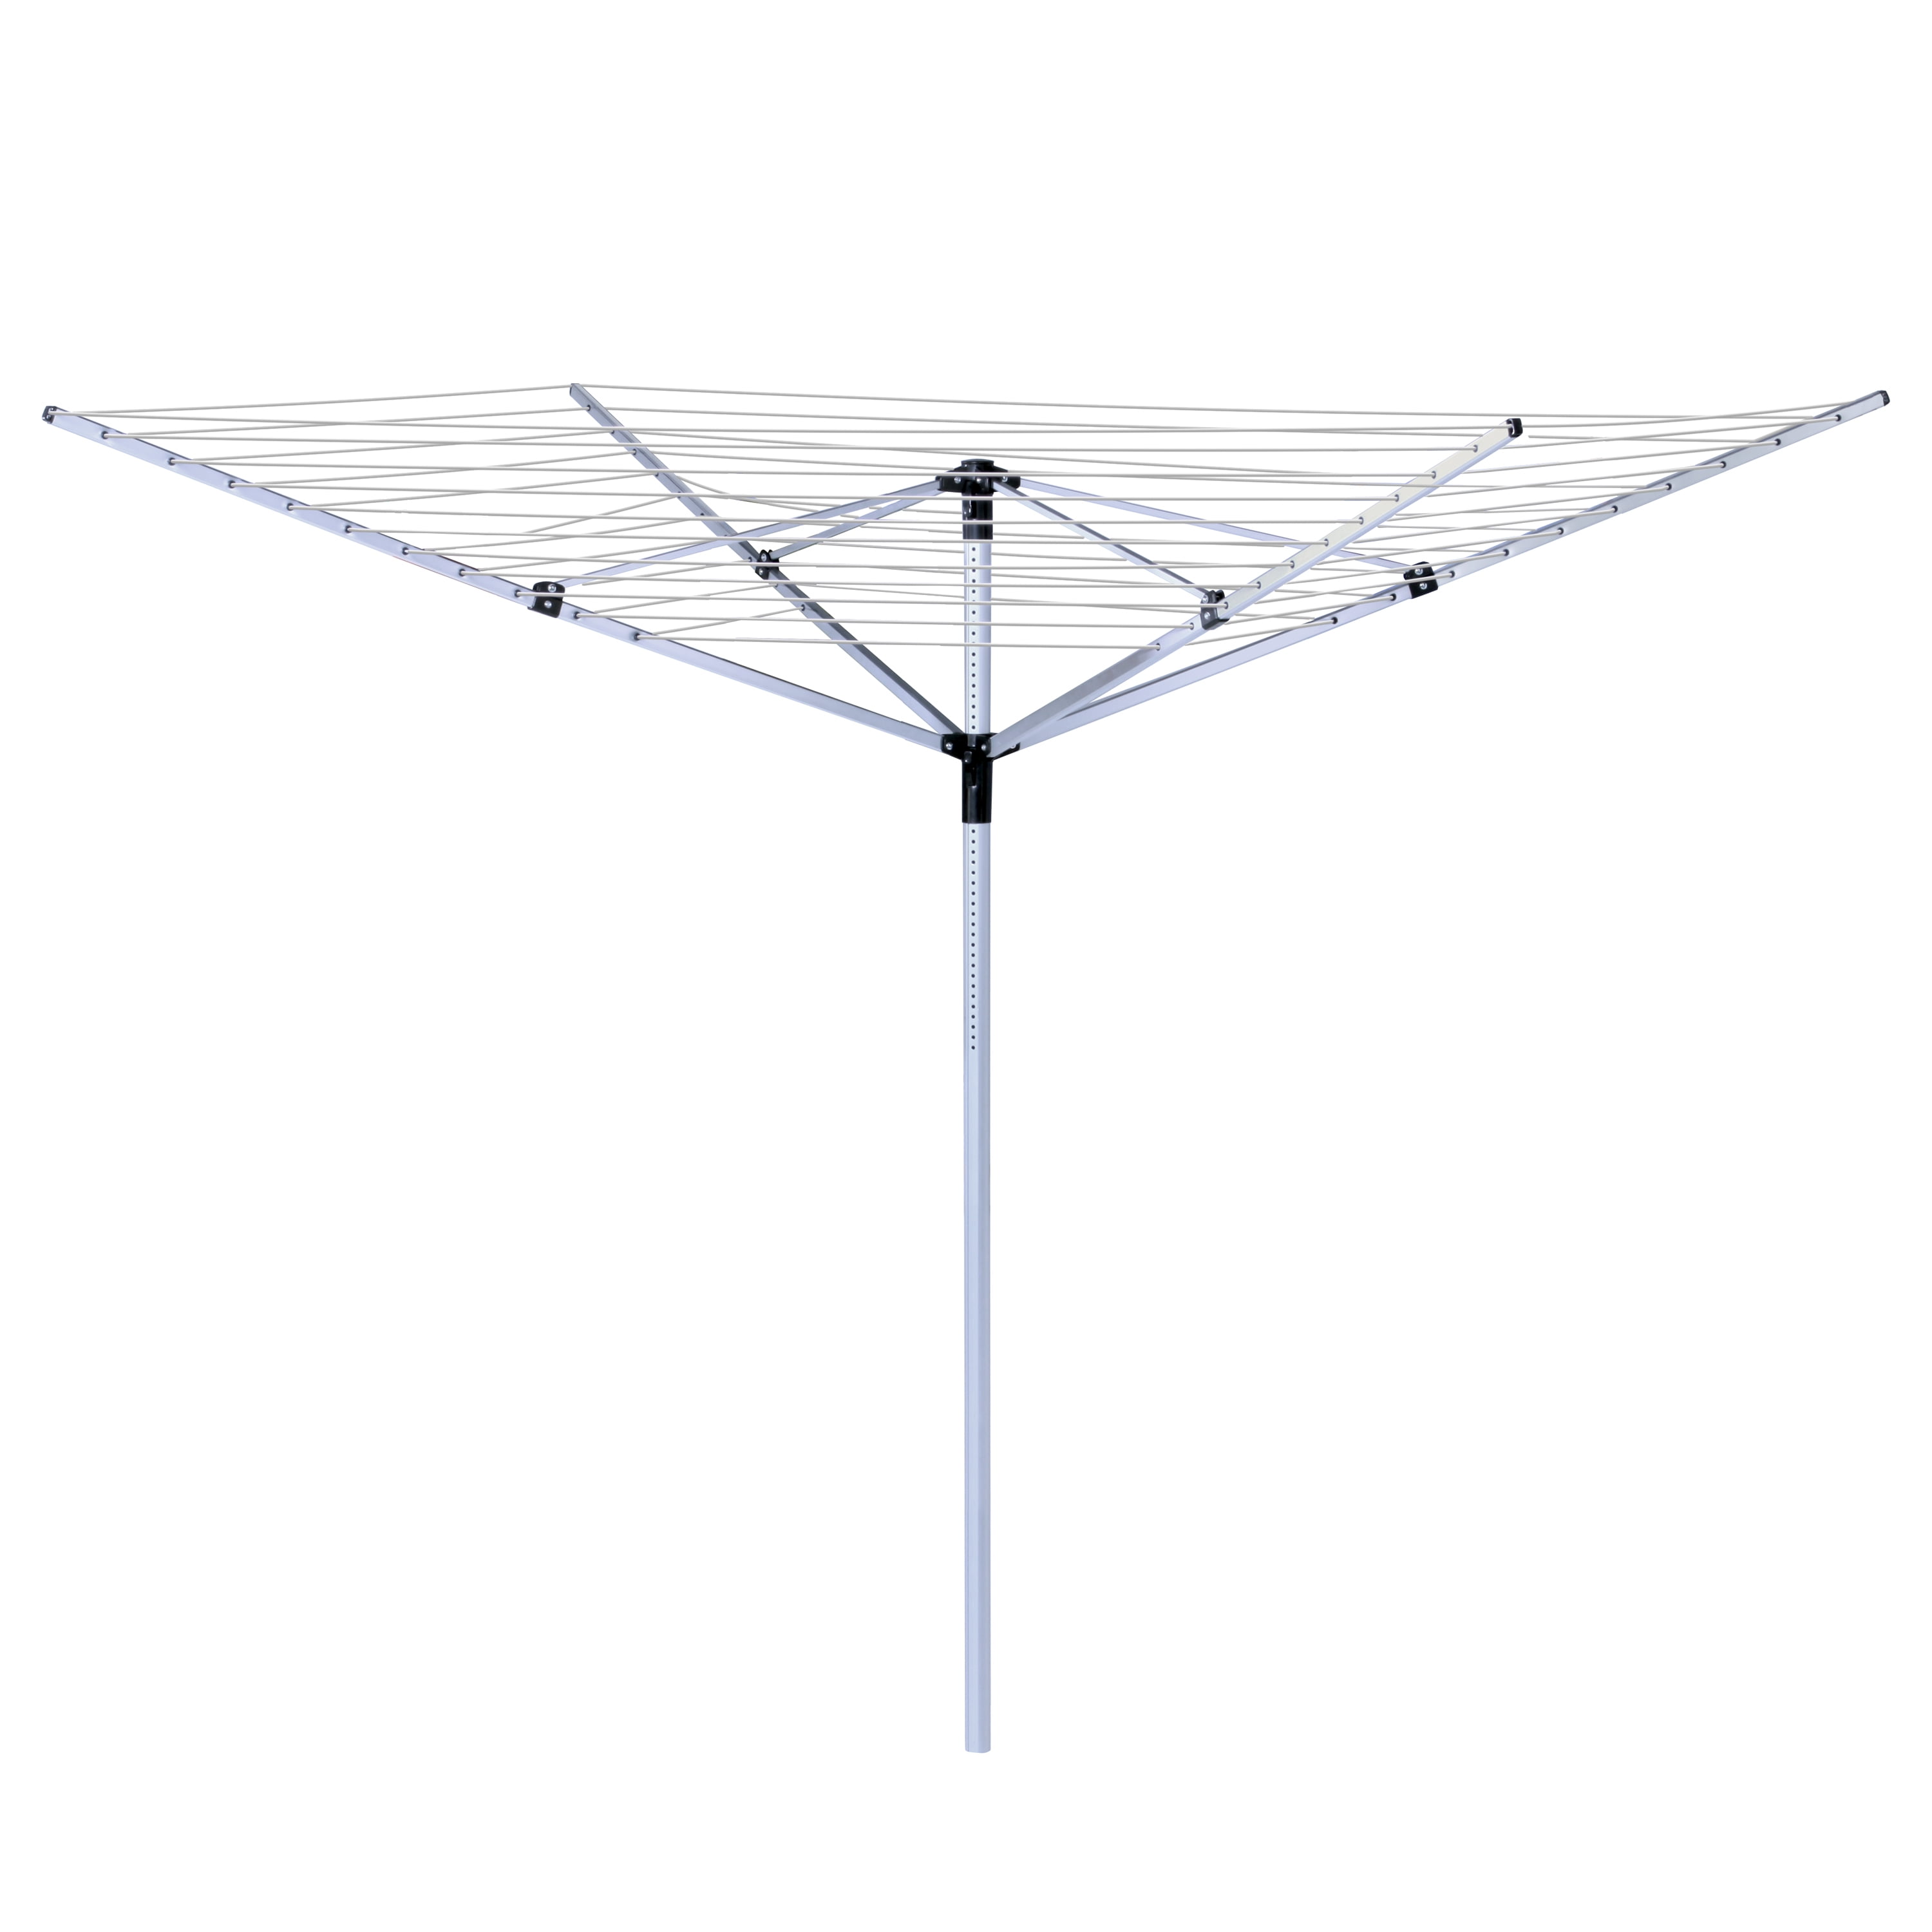 Leaf Design Minky Deluxe Outdoor Rotary Washing Line Airer Dryer Parasol Cover 